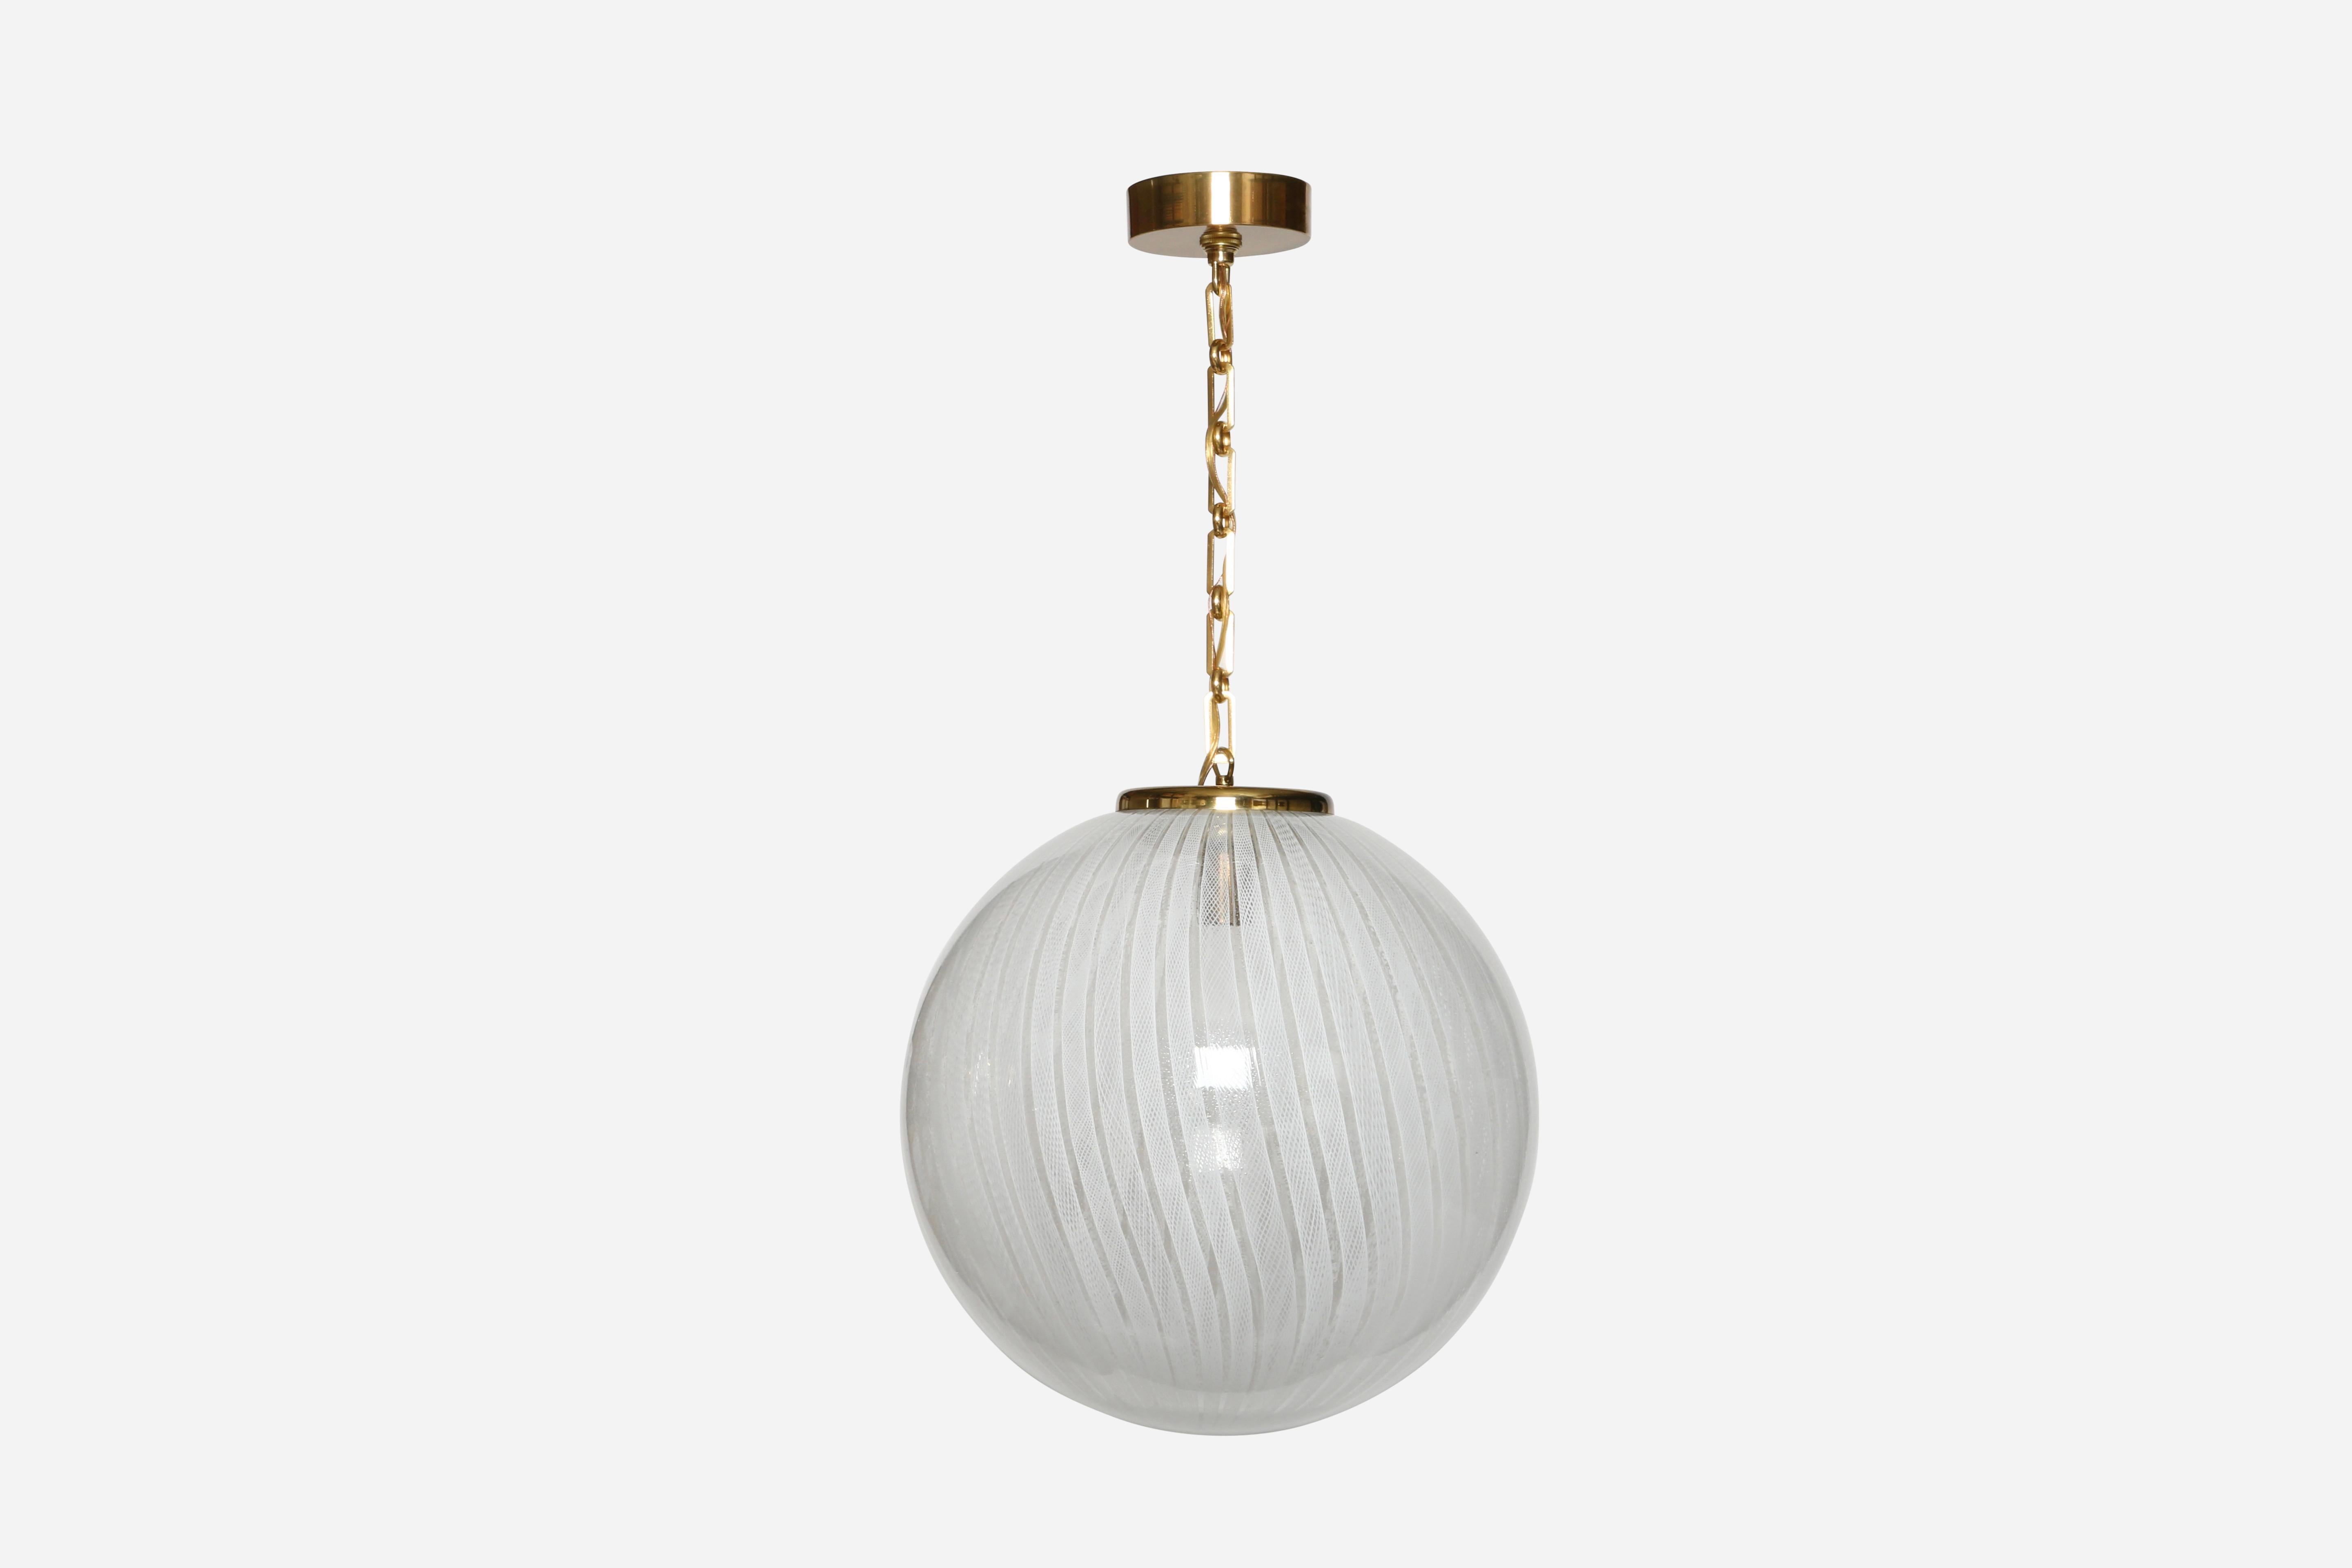 Murano ceiling pendant with Zanfirico glass.
Italy, 1960s.
Rare and absolutely exquisite glass making technique with unusually large size.
Height adjustable.
Rewired for US.
Takes one Edison bulb.

We take pride in bringing vintage fixtures to their